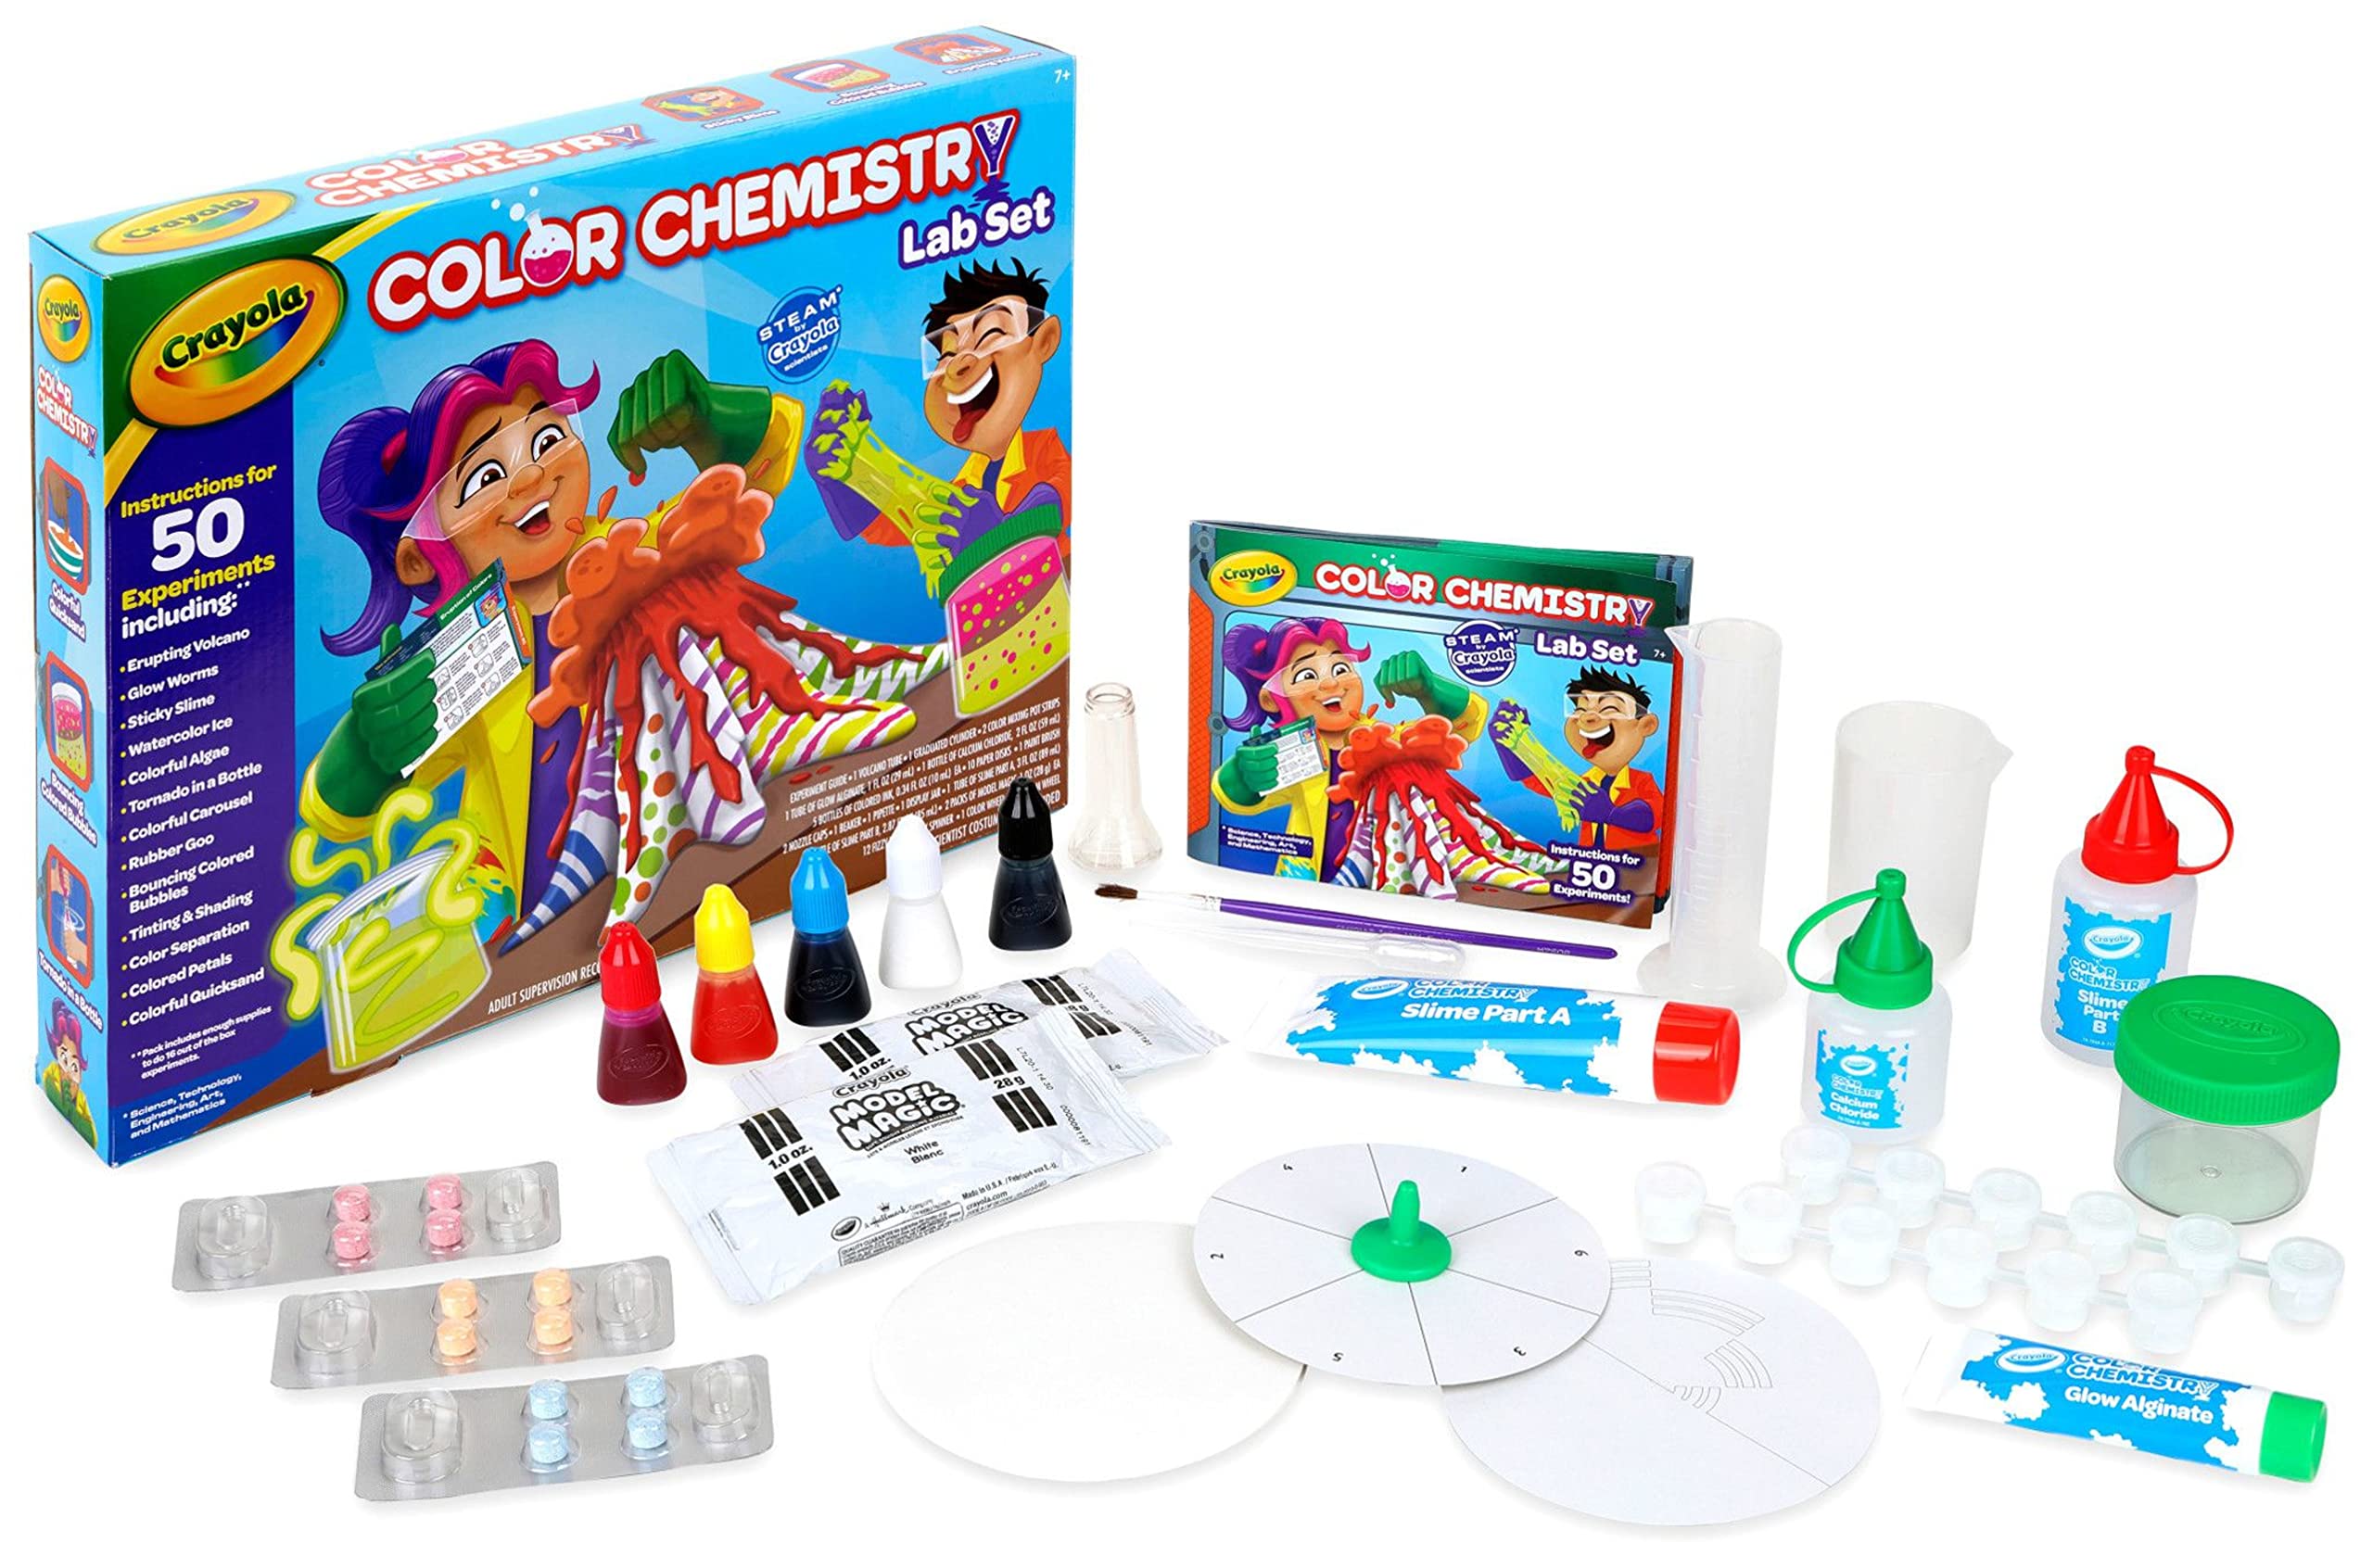 Book Cover Crayola Color Chemistry Set, Science Kits For Kids, Stem Toys & Gifts, Ages 7, 8, 9, 10